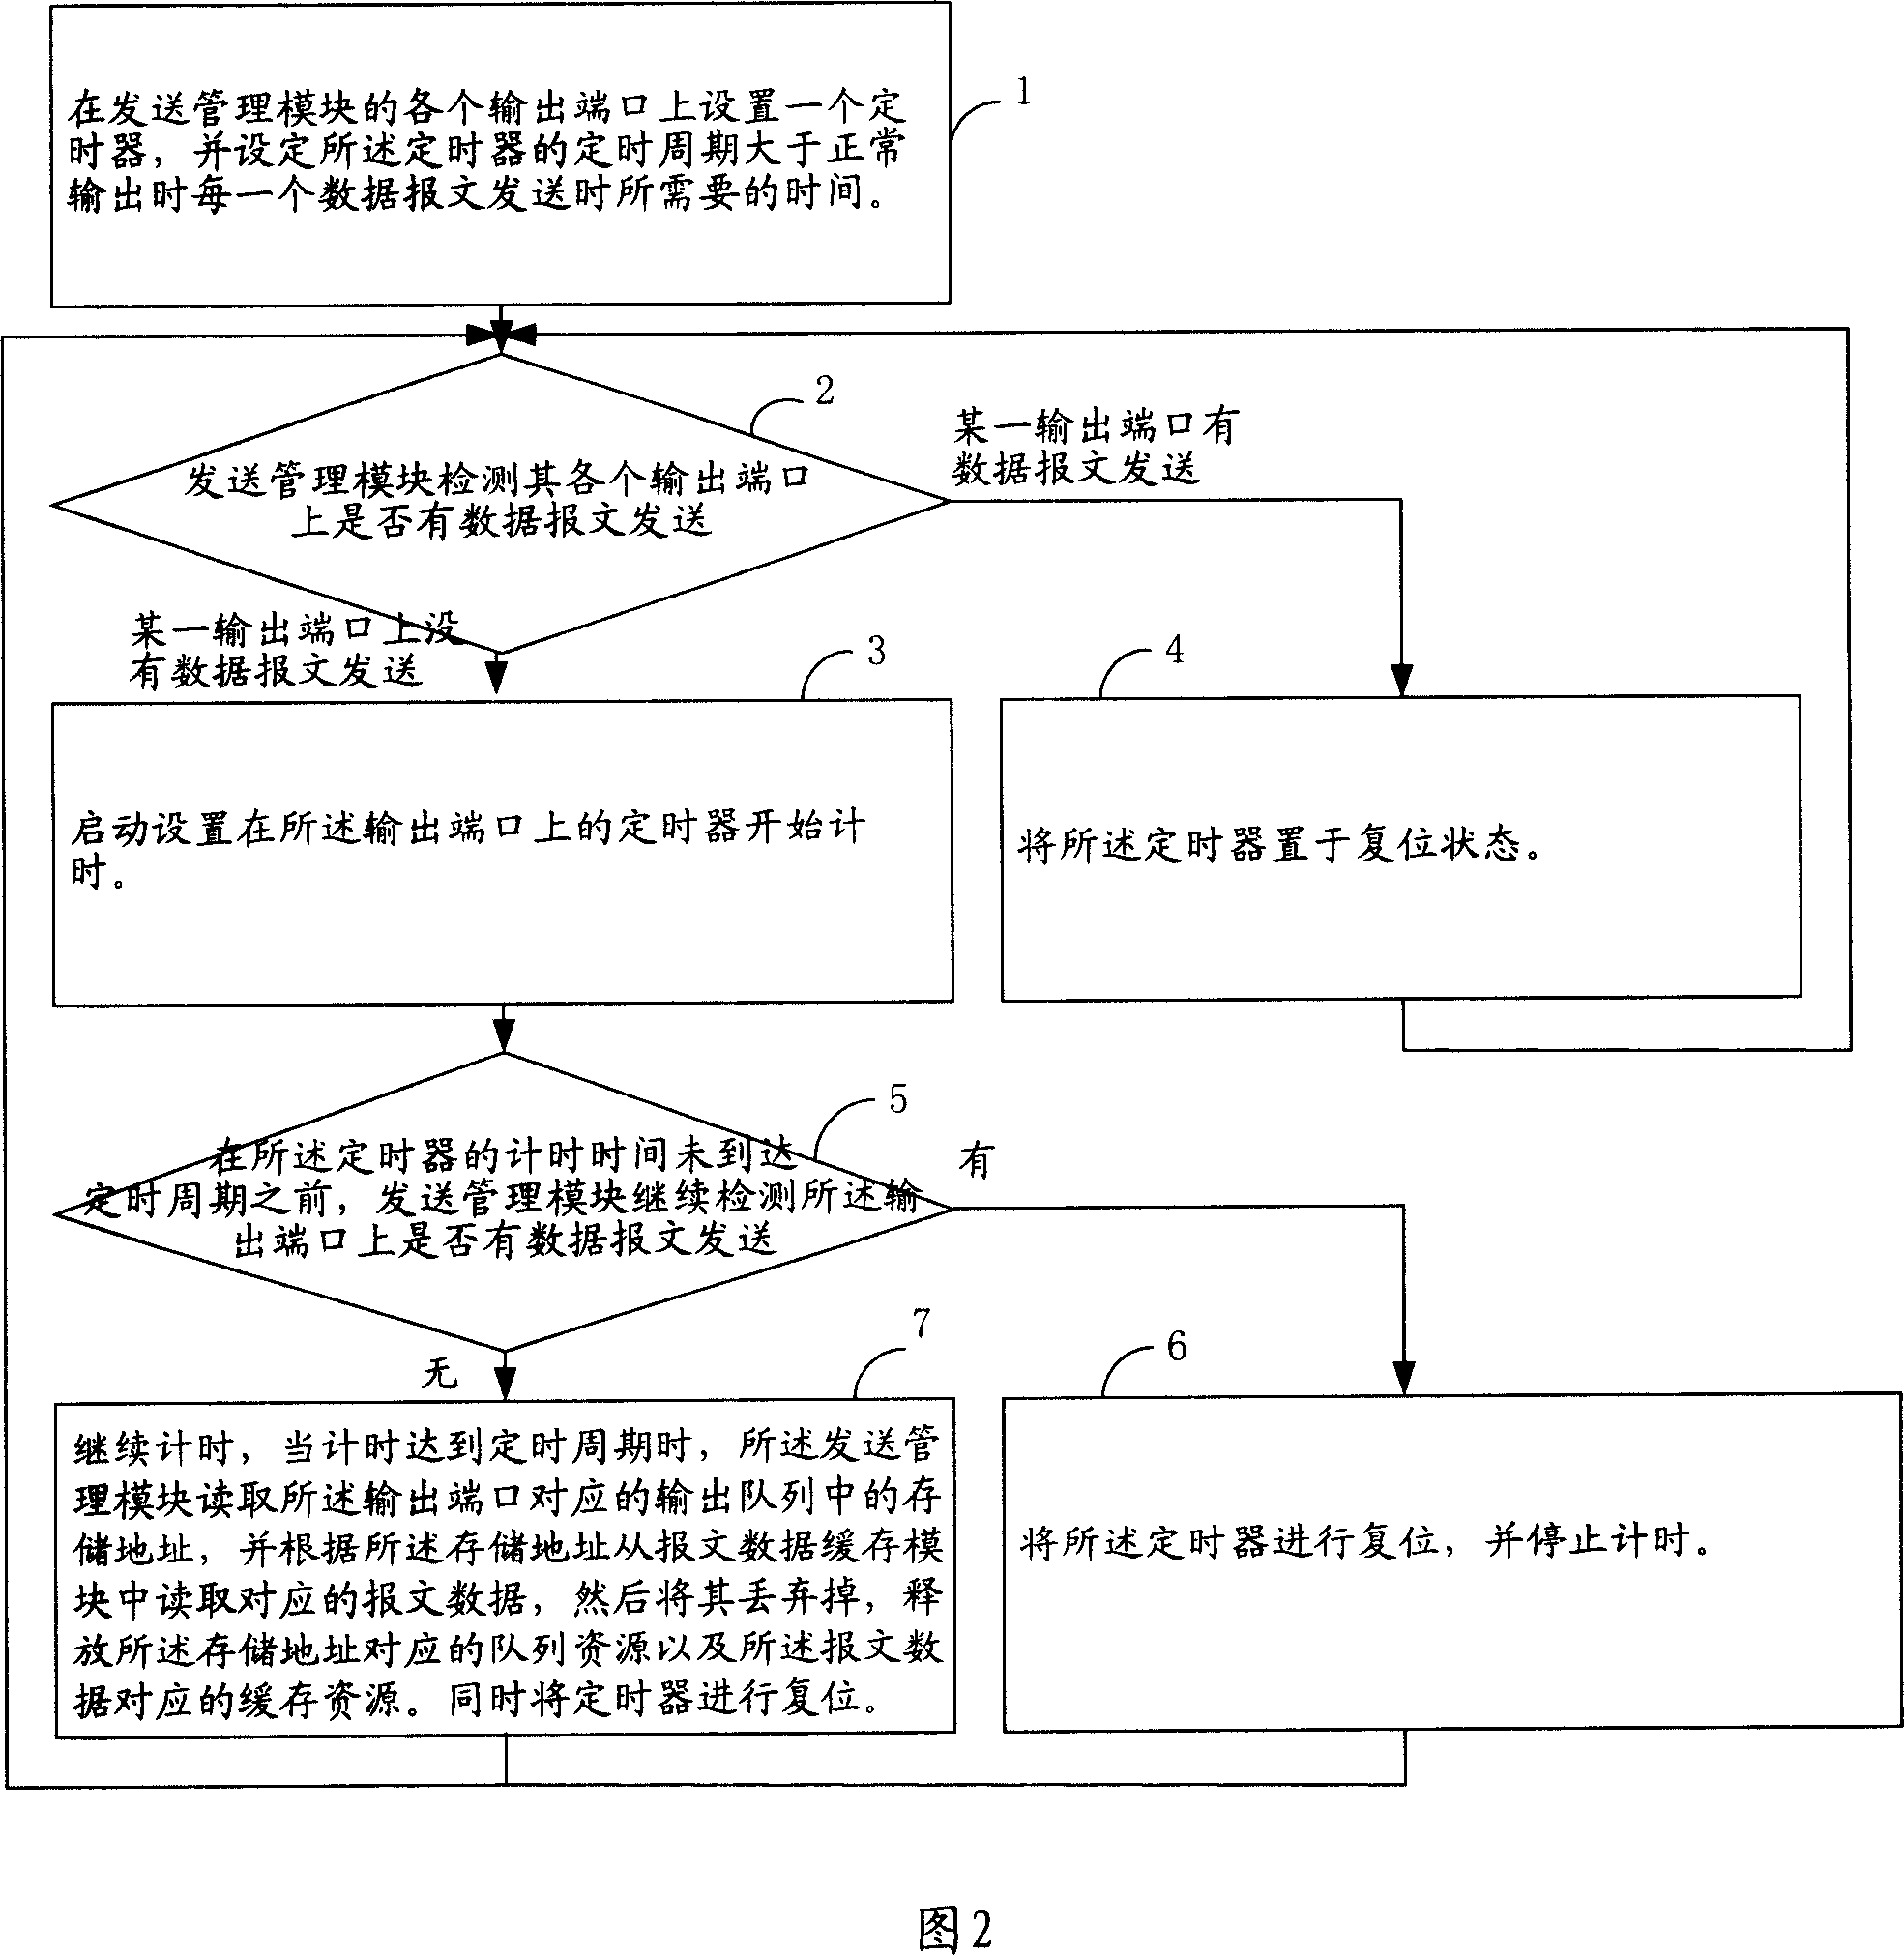 Method for releasing invalid-occupied resource and storage converter